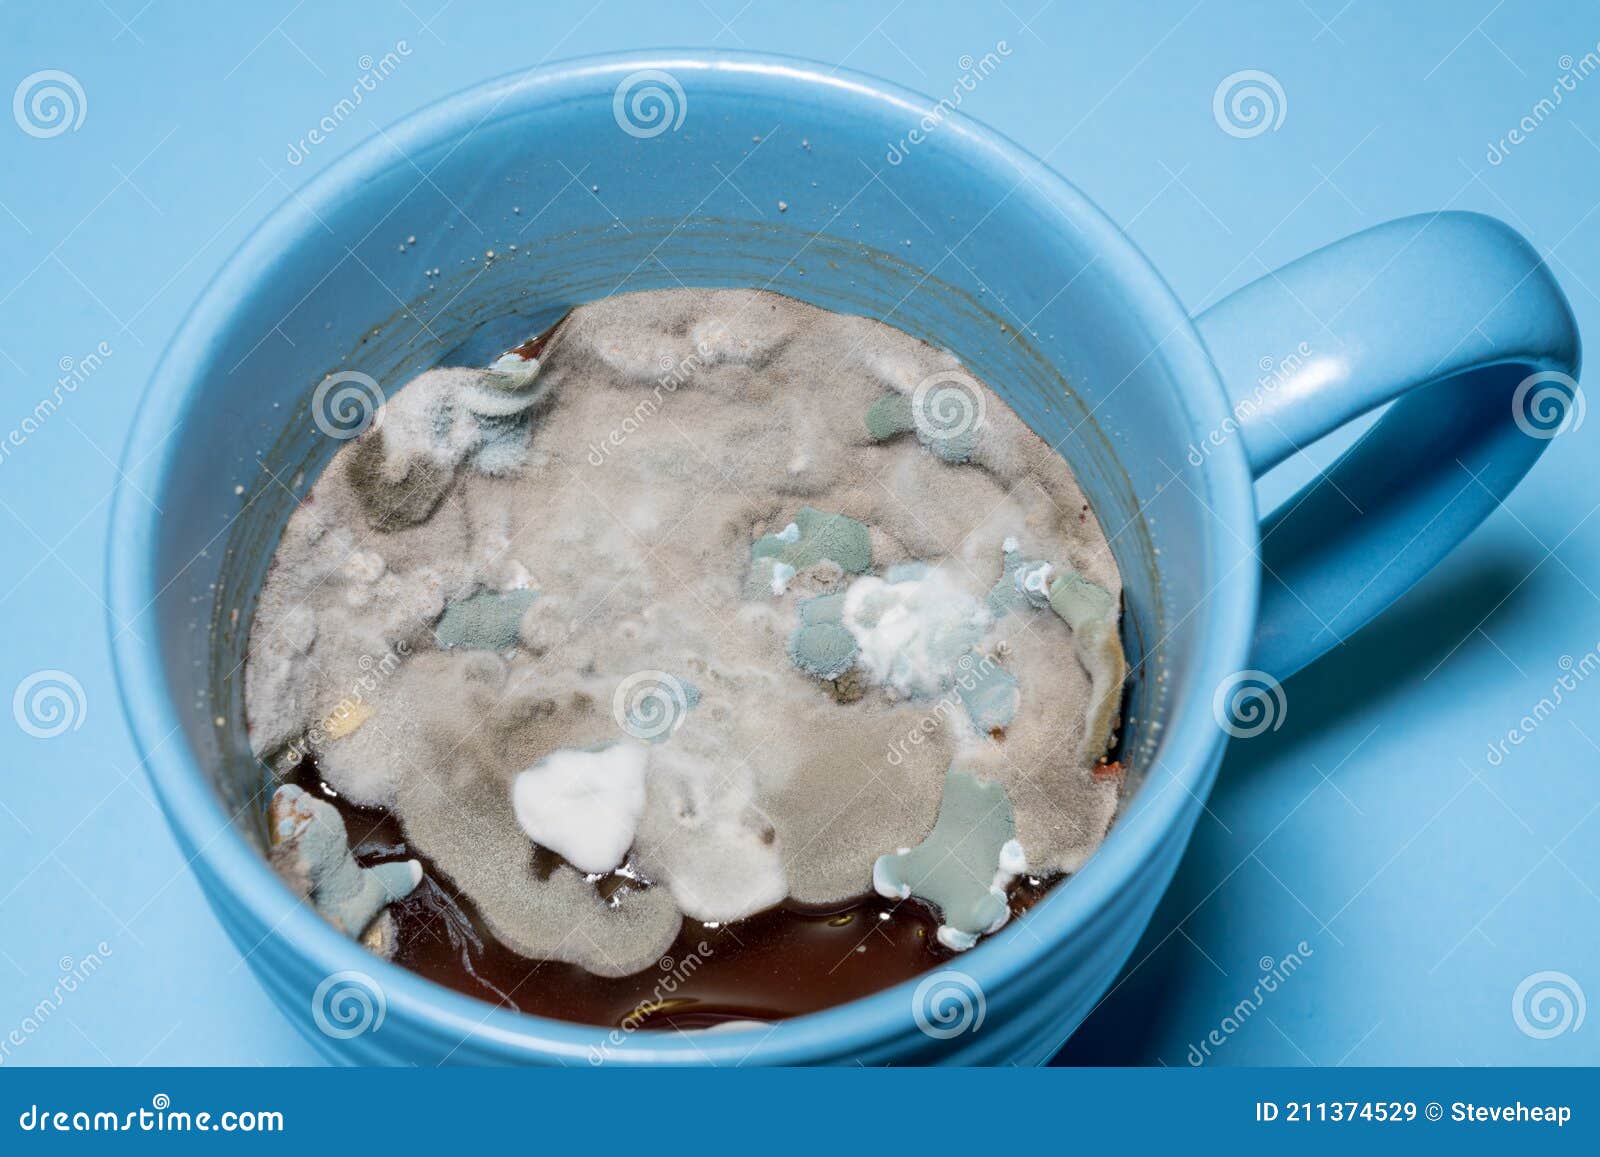 Gravy Growing Many Types of Mould and Fungus Inside Blue Coffee